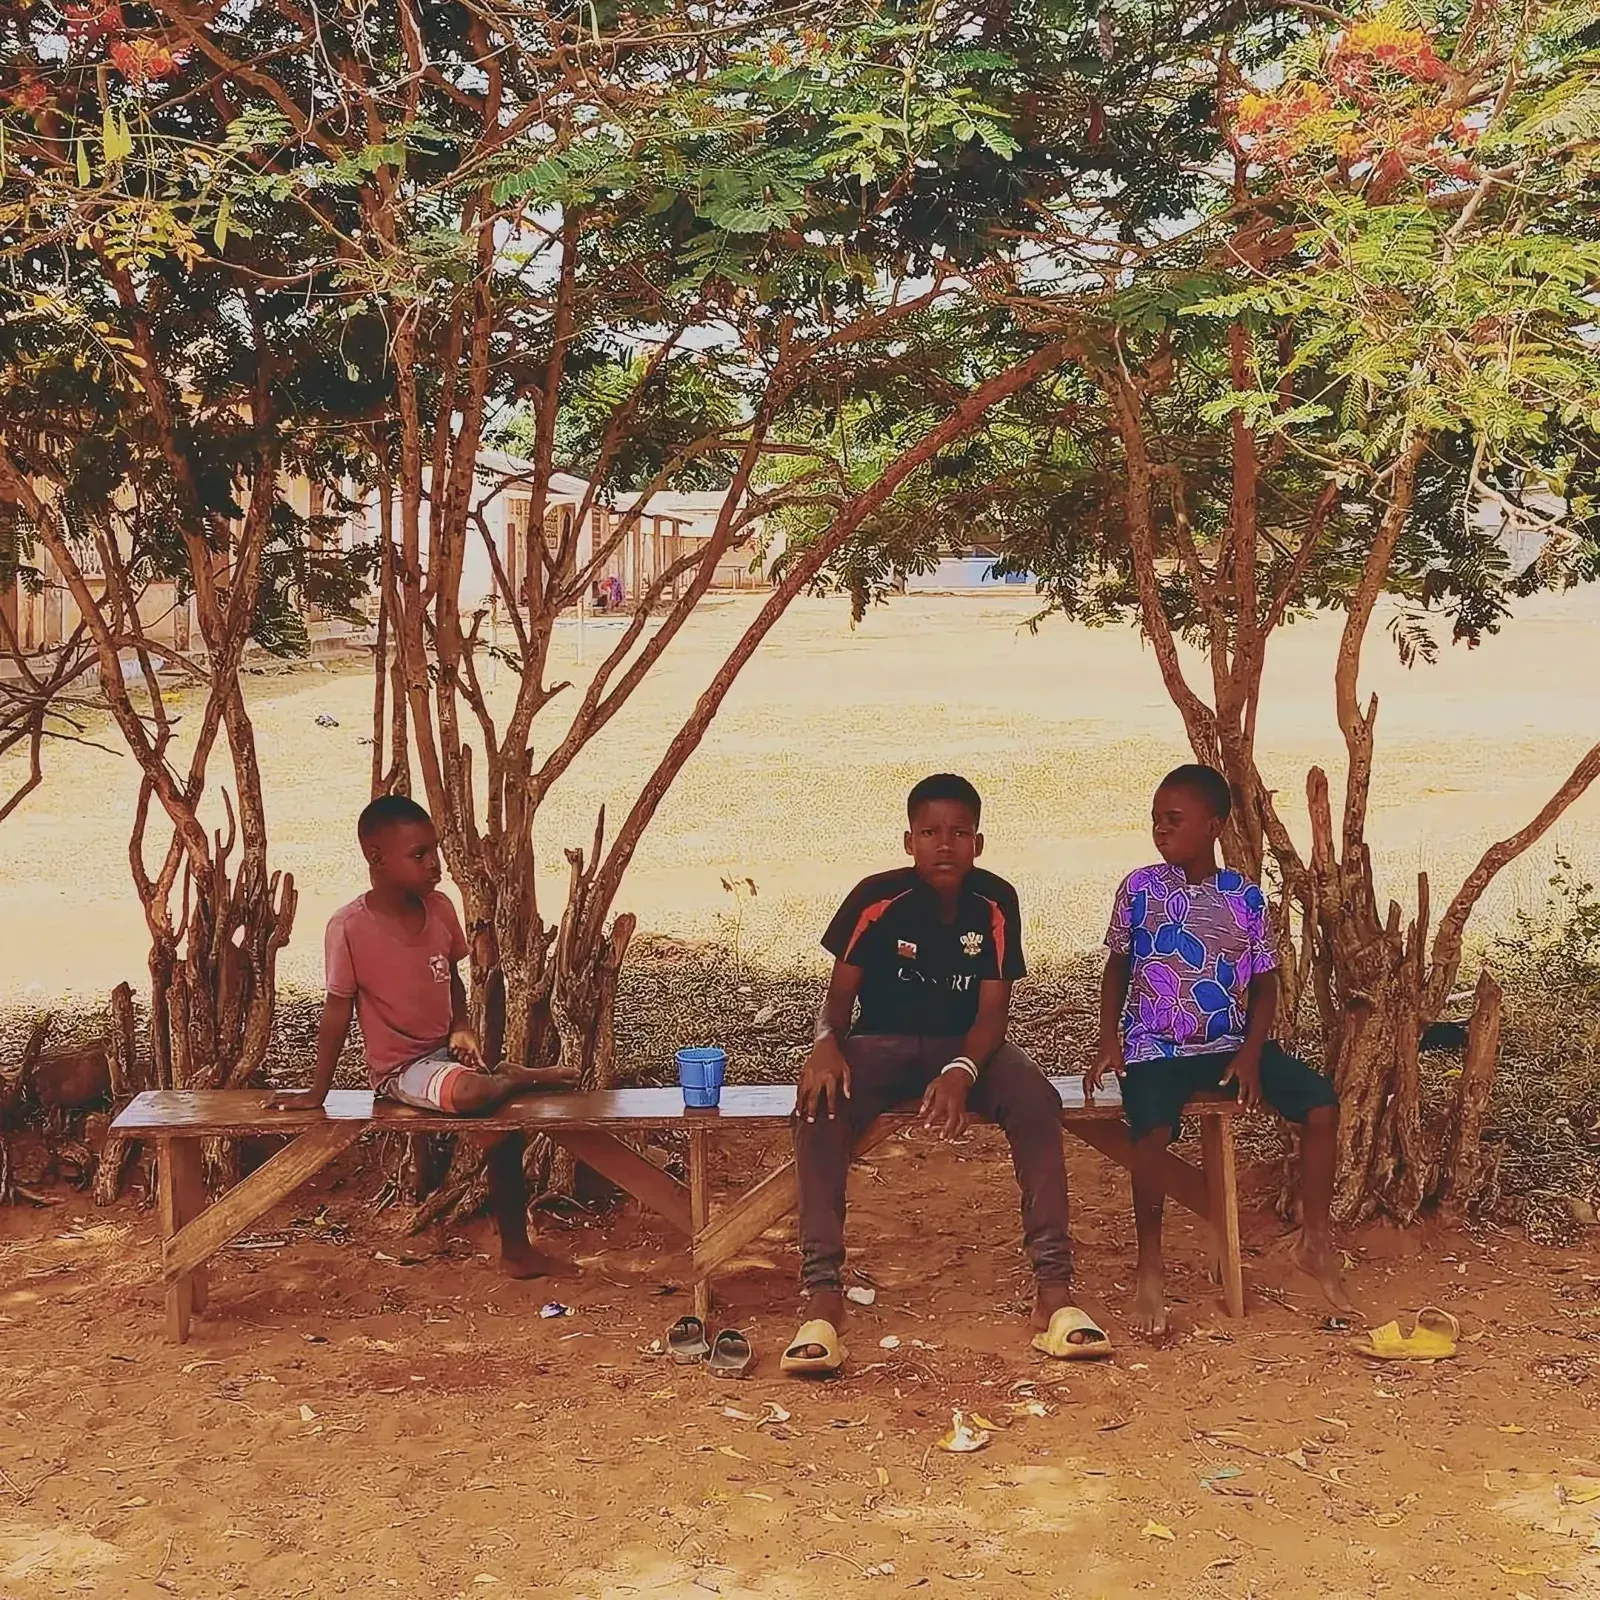 Group of young boys seated on a bench under a tree in Togoville, Togo.